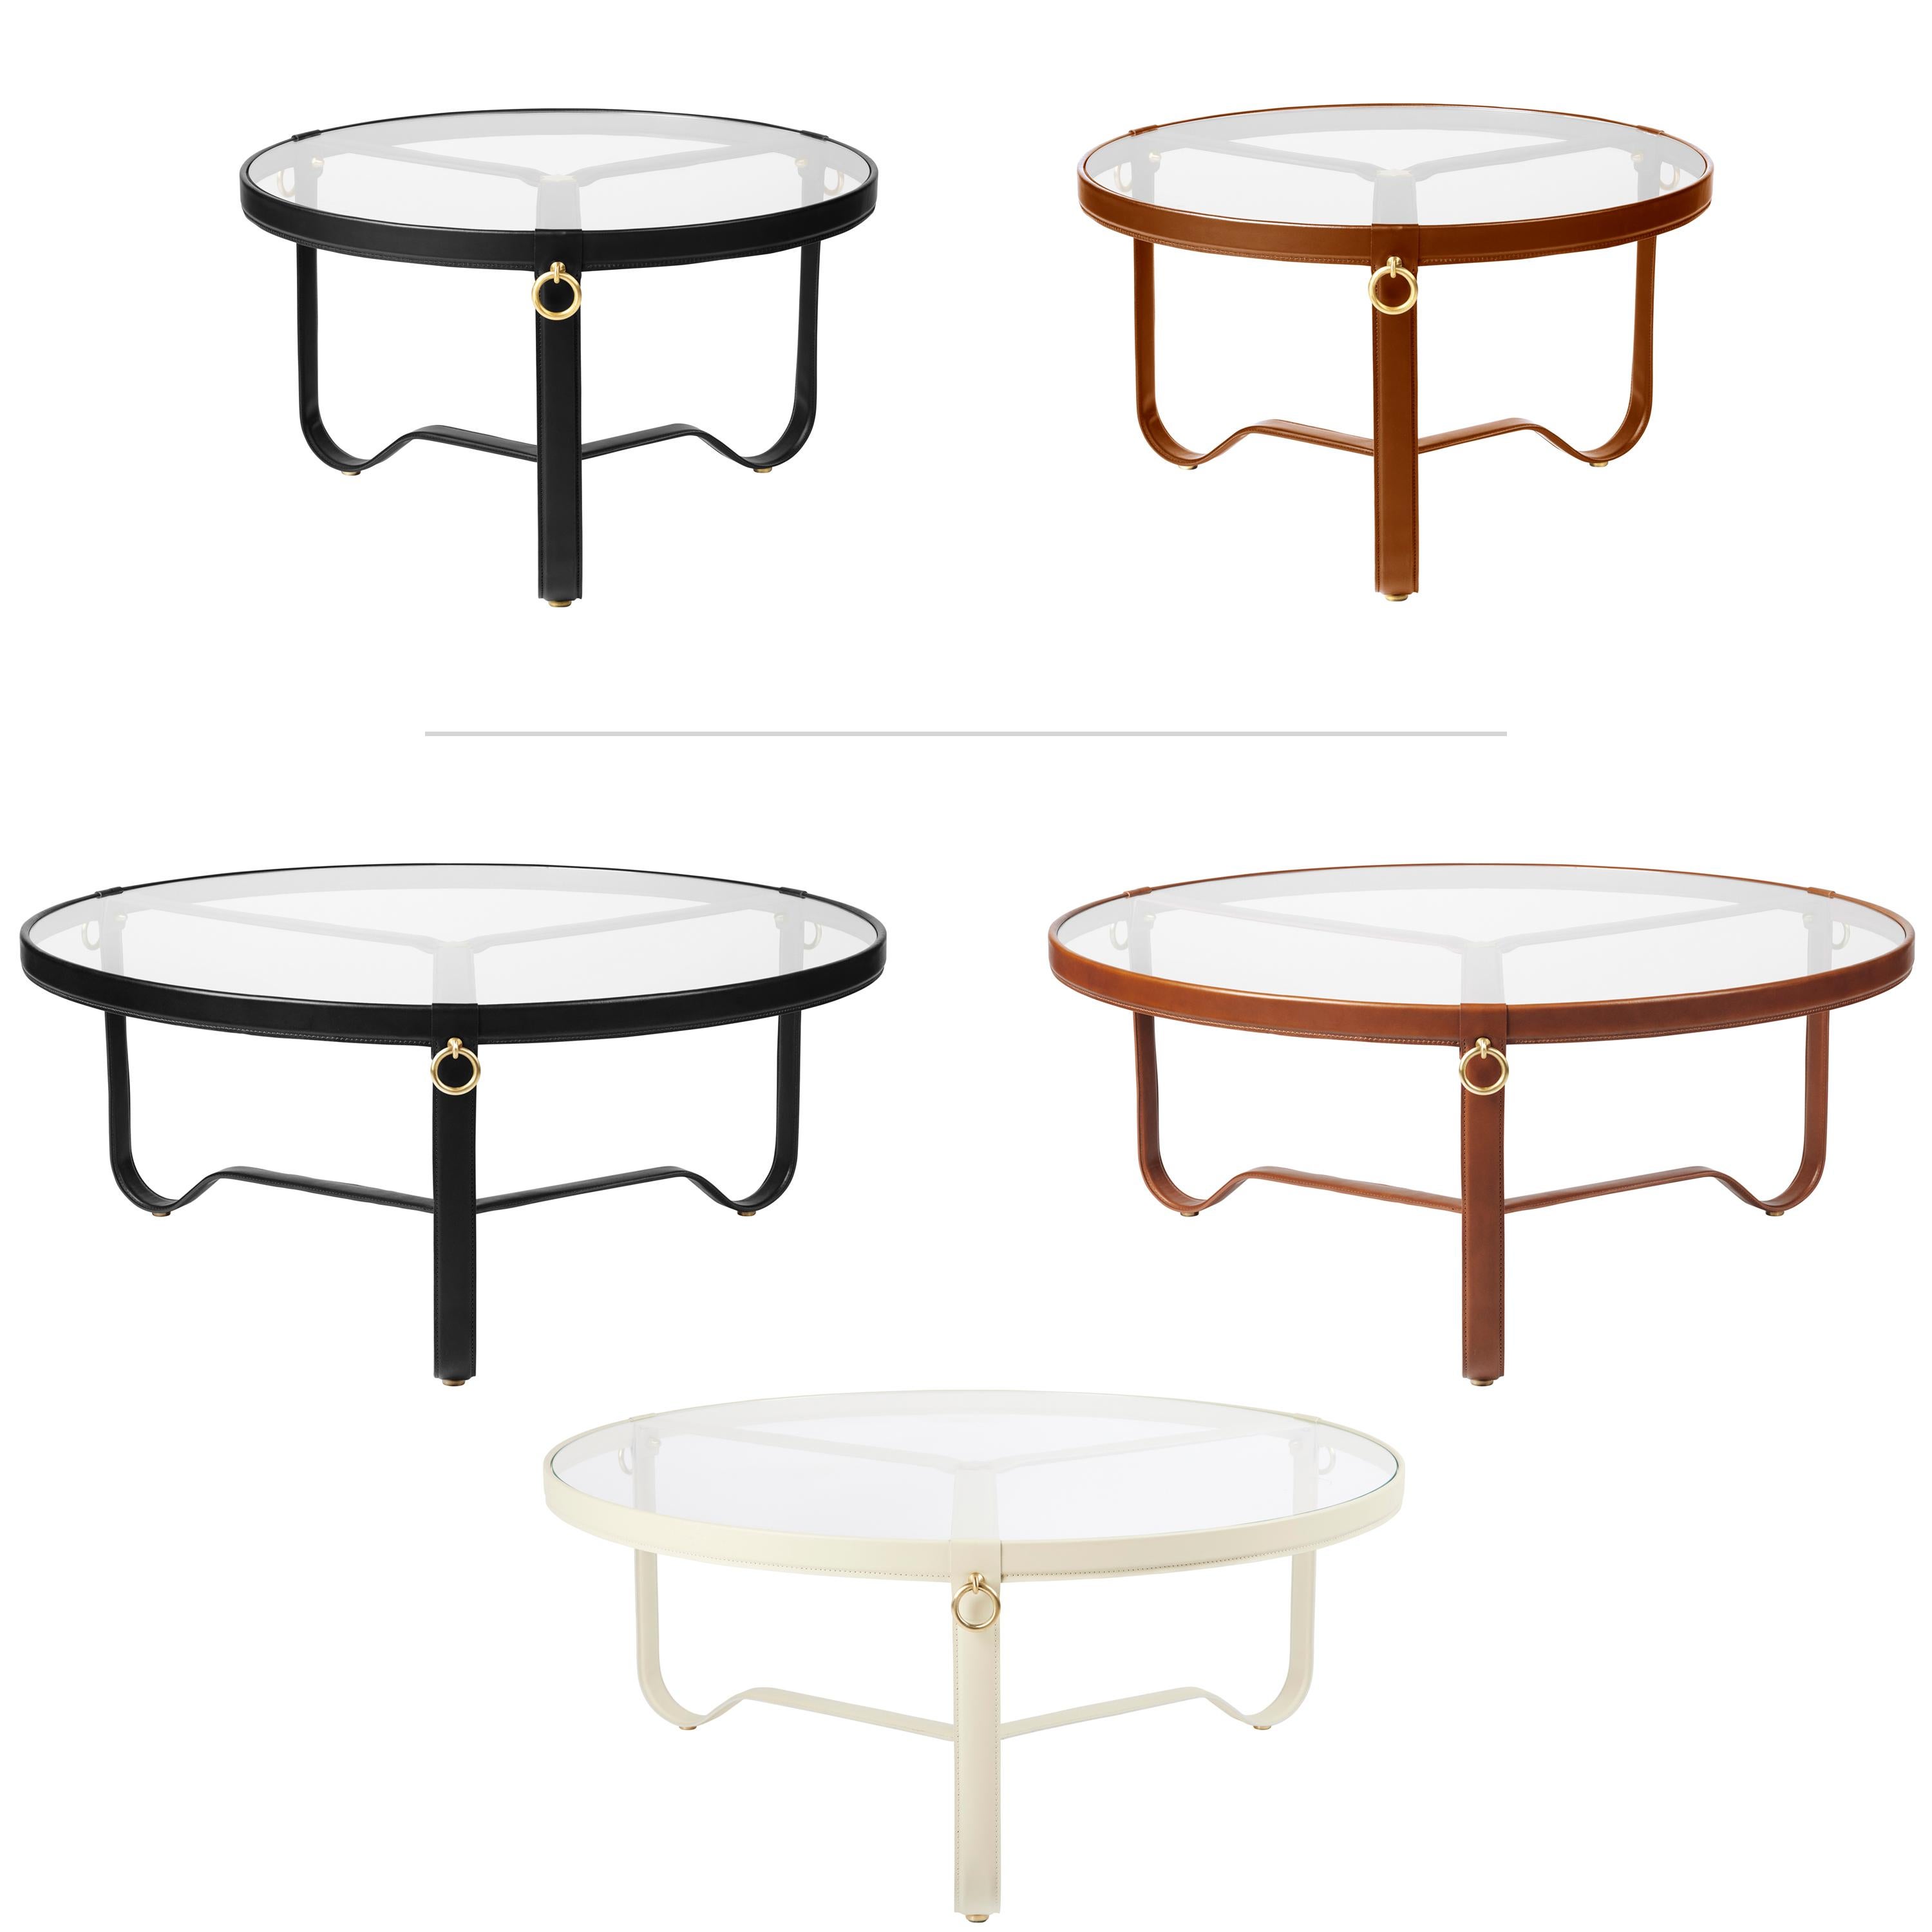 Large Jacques Adnet 'Circulaire' Glass and Black Leather Coffee Table for GUBI For Sale 8